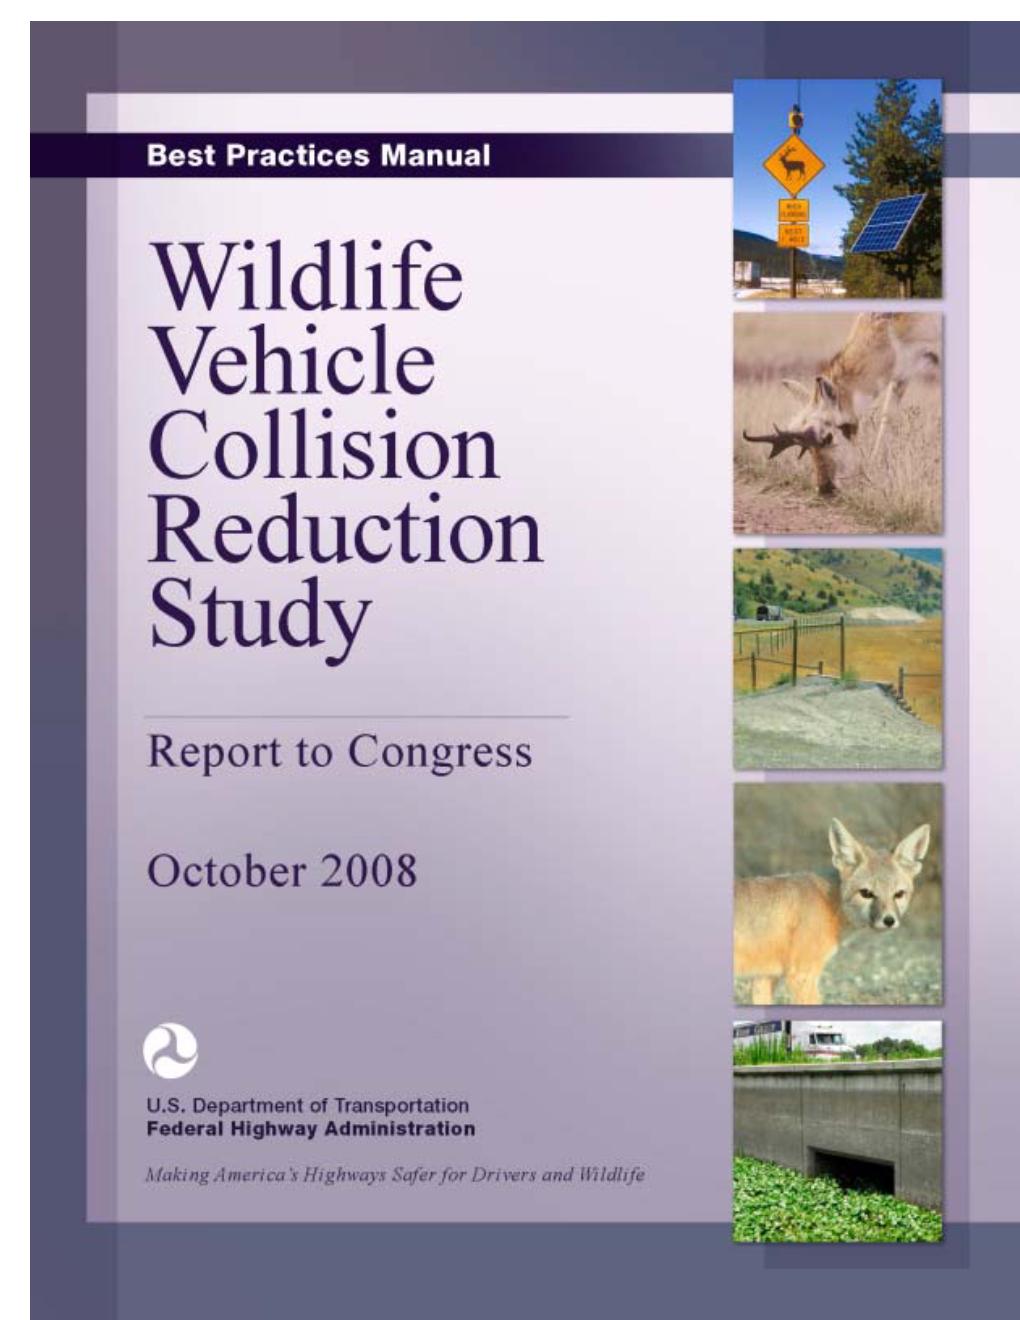 Wildlife–Vehicle Collision Reduction Study: Best Practices Manual June 2008